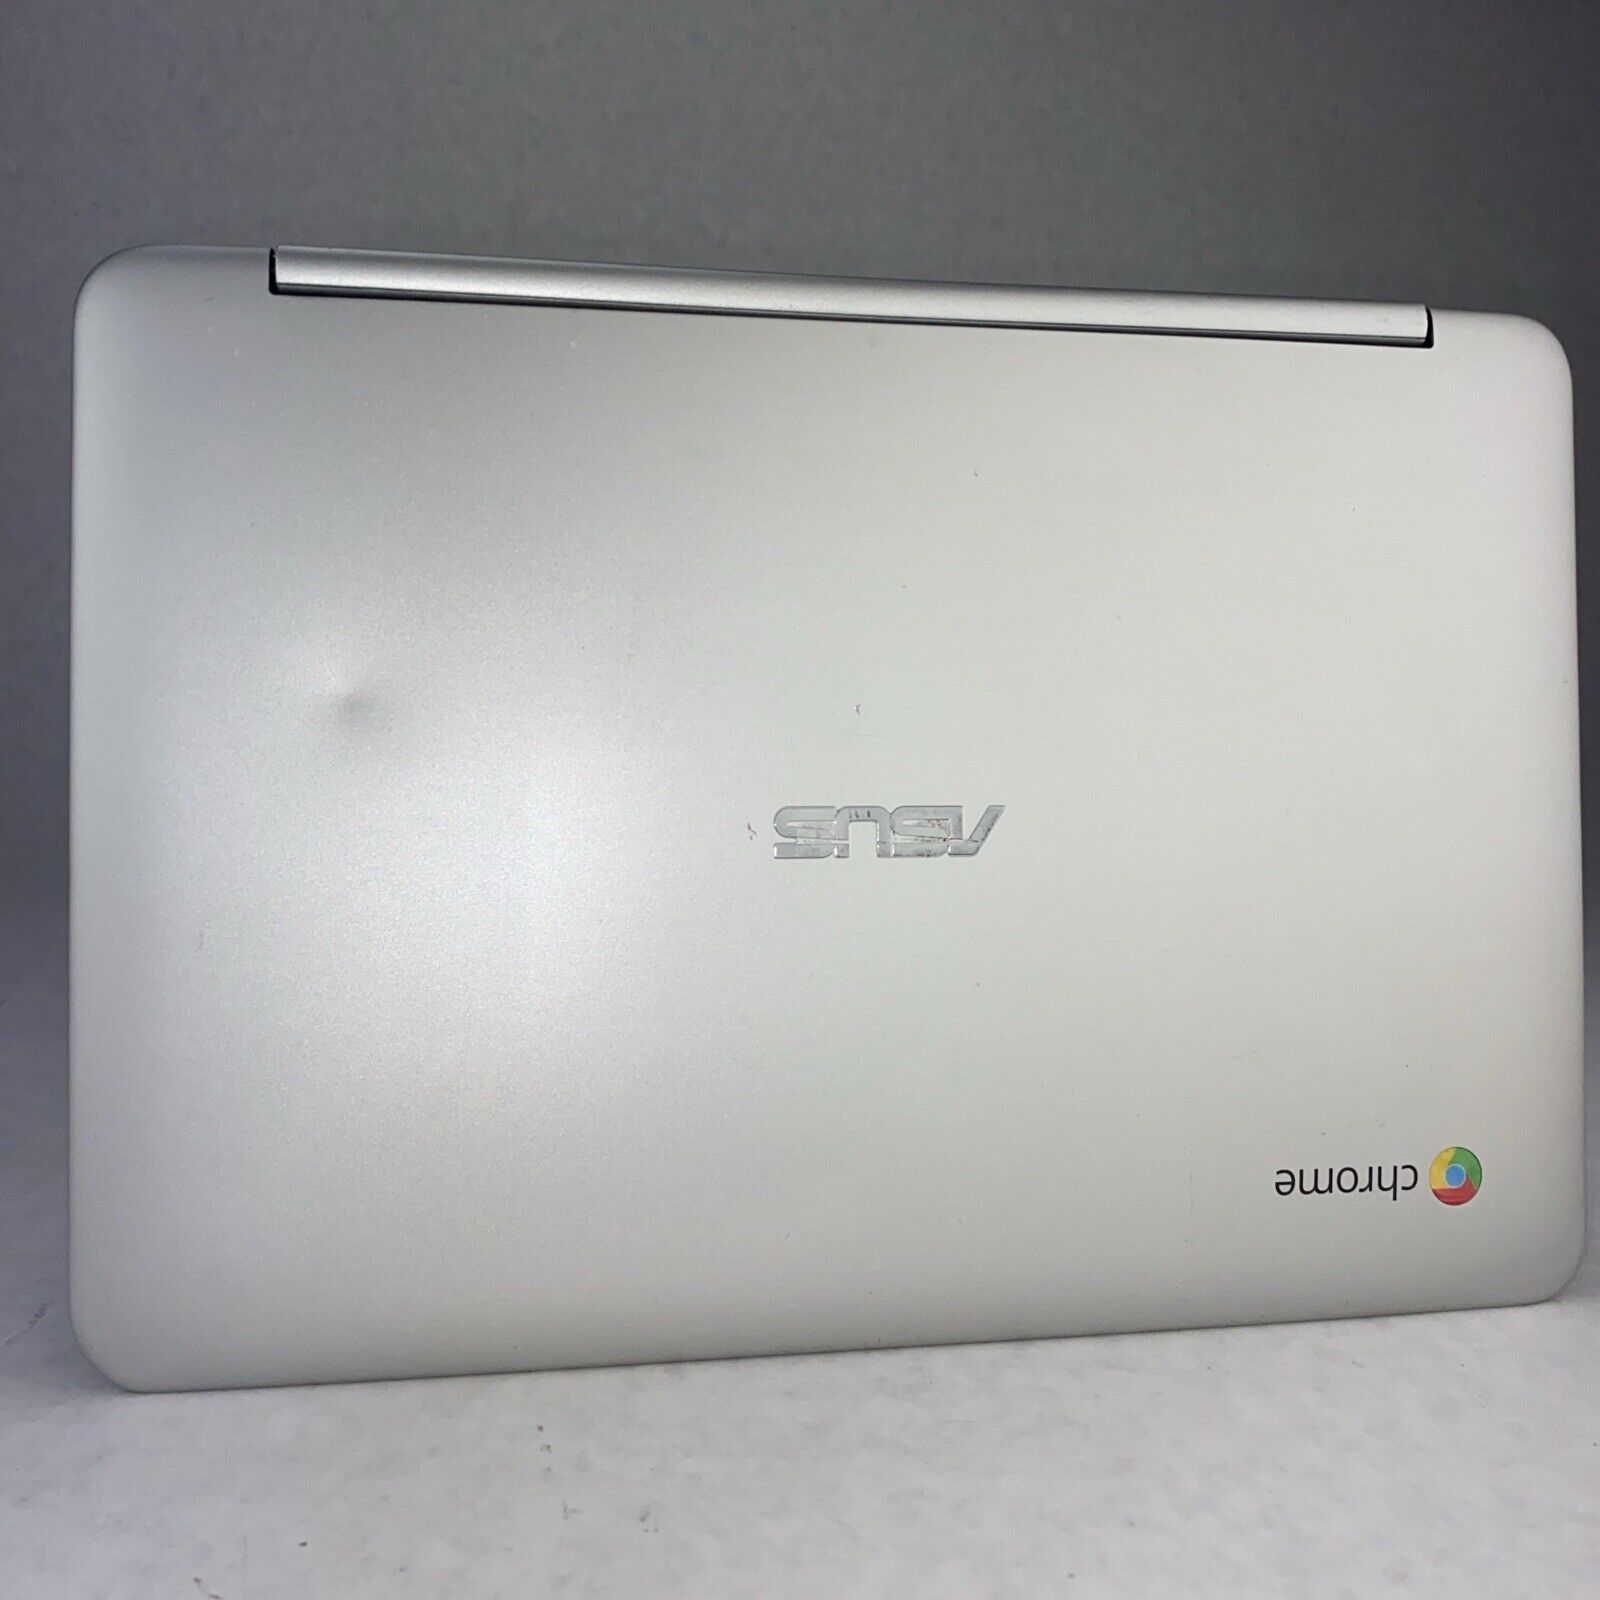 Asus C100P Flip 2-in-1 Touchscreen 10.1" Chromebook 4GB RAM 16GB SSD No Charger